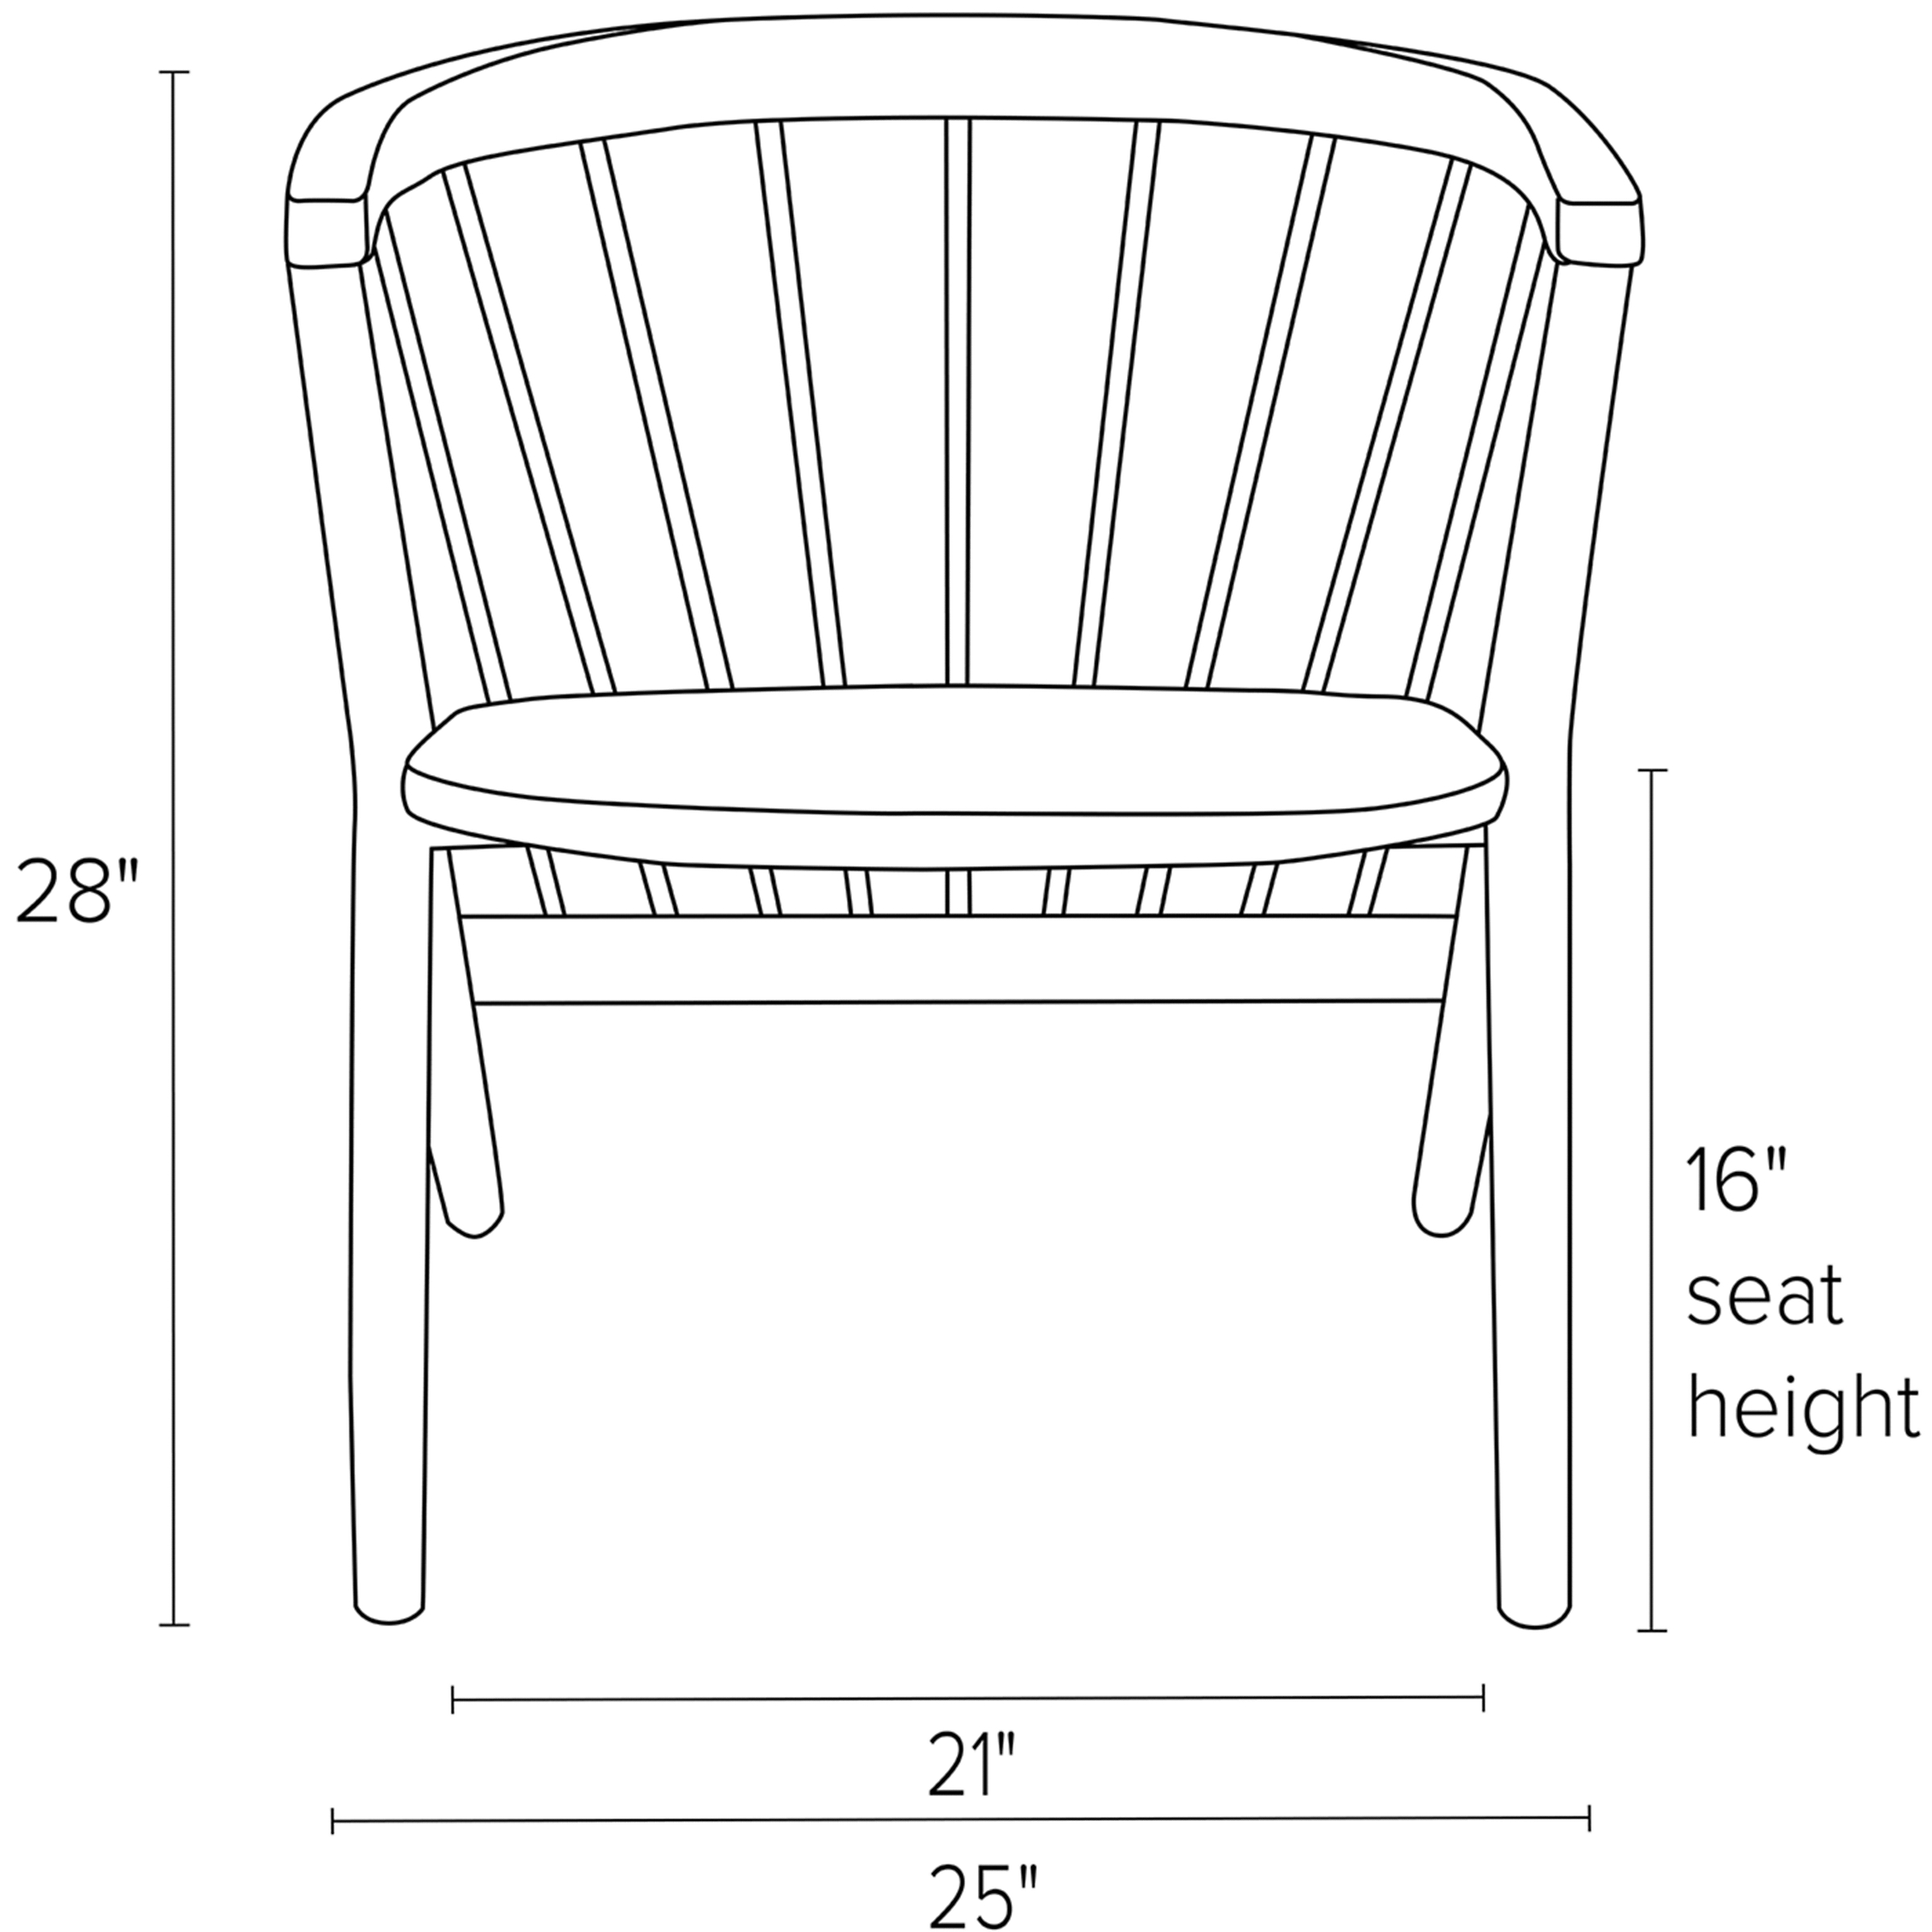 Front view dimension illustration of Soren chair.